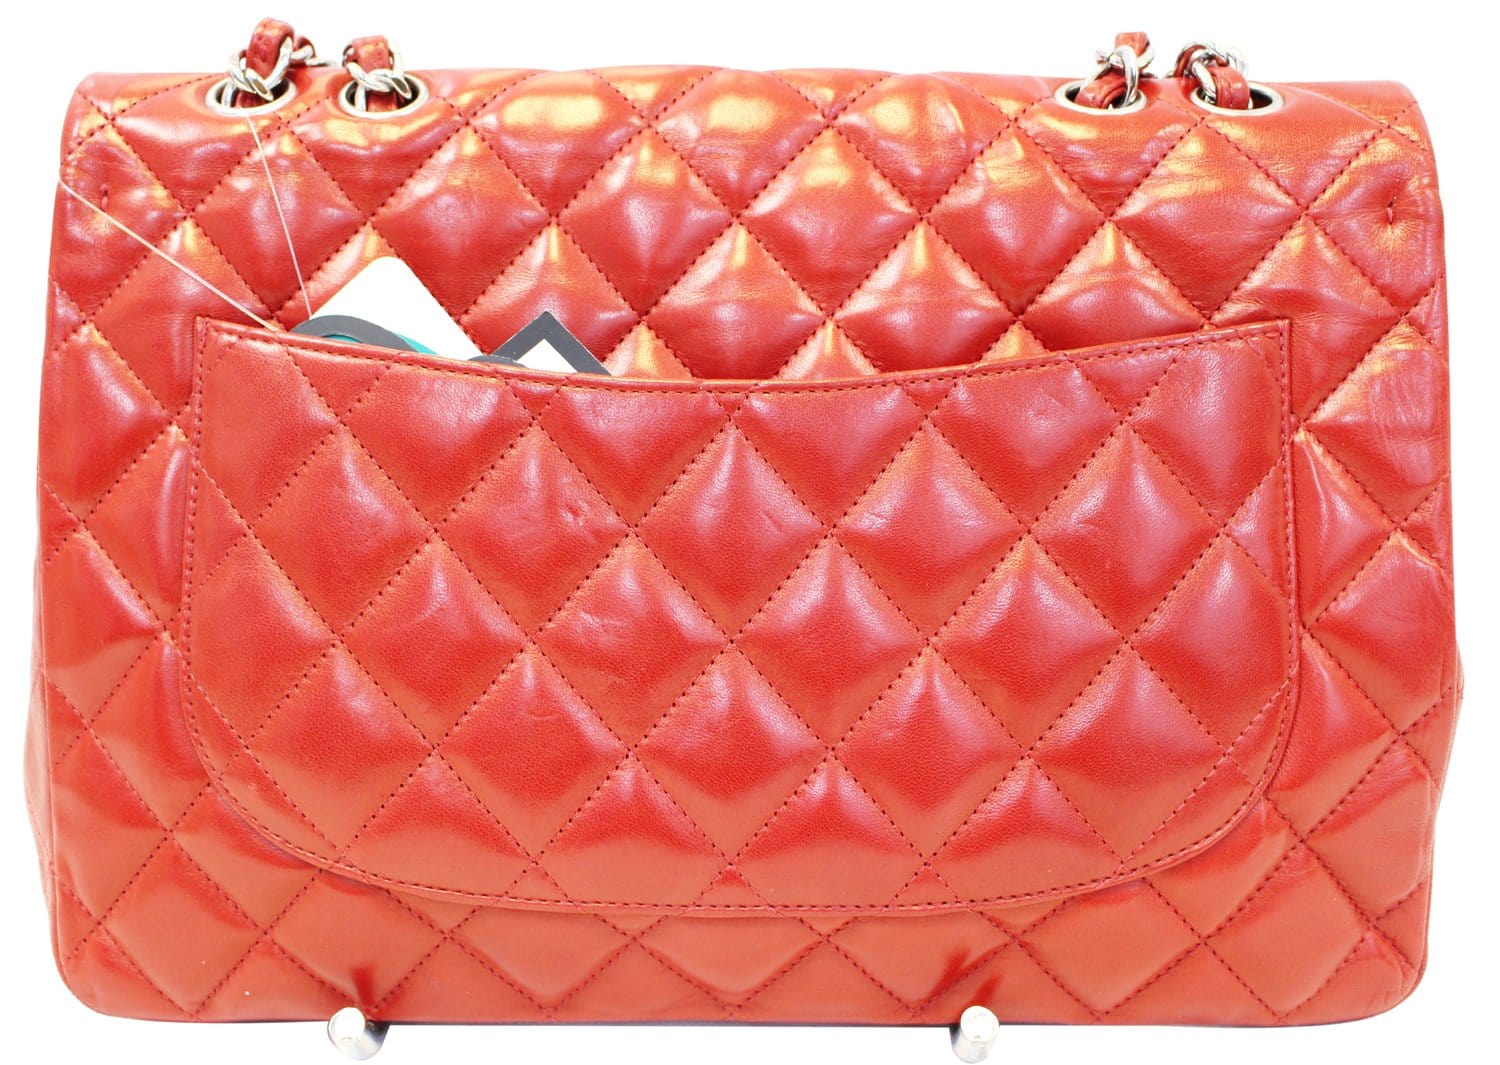 Chanel Classic Quilted Lambskin Jumbo Double Flap Bag in Peach